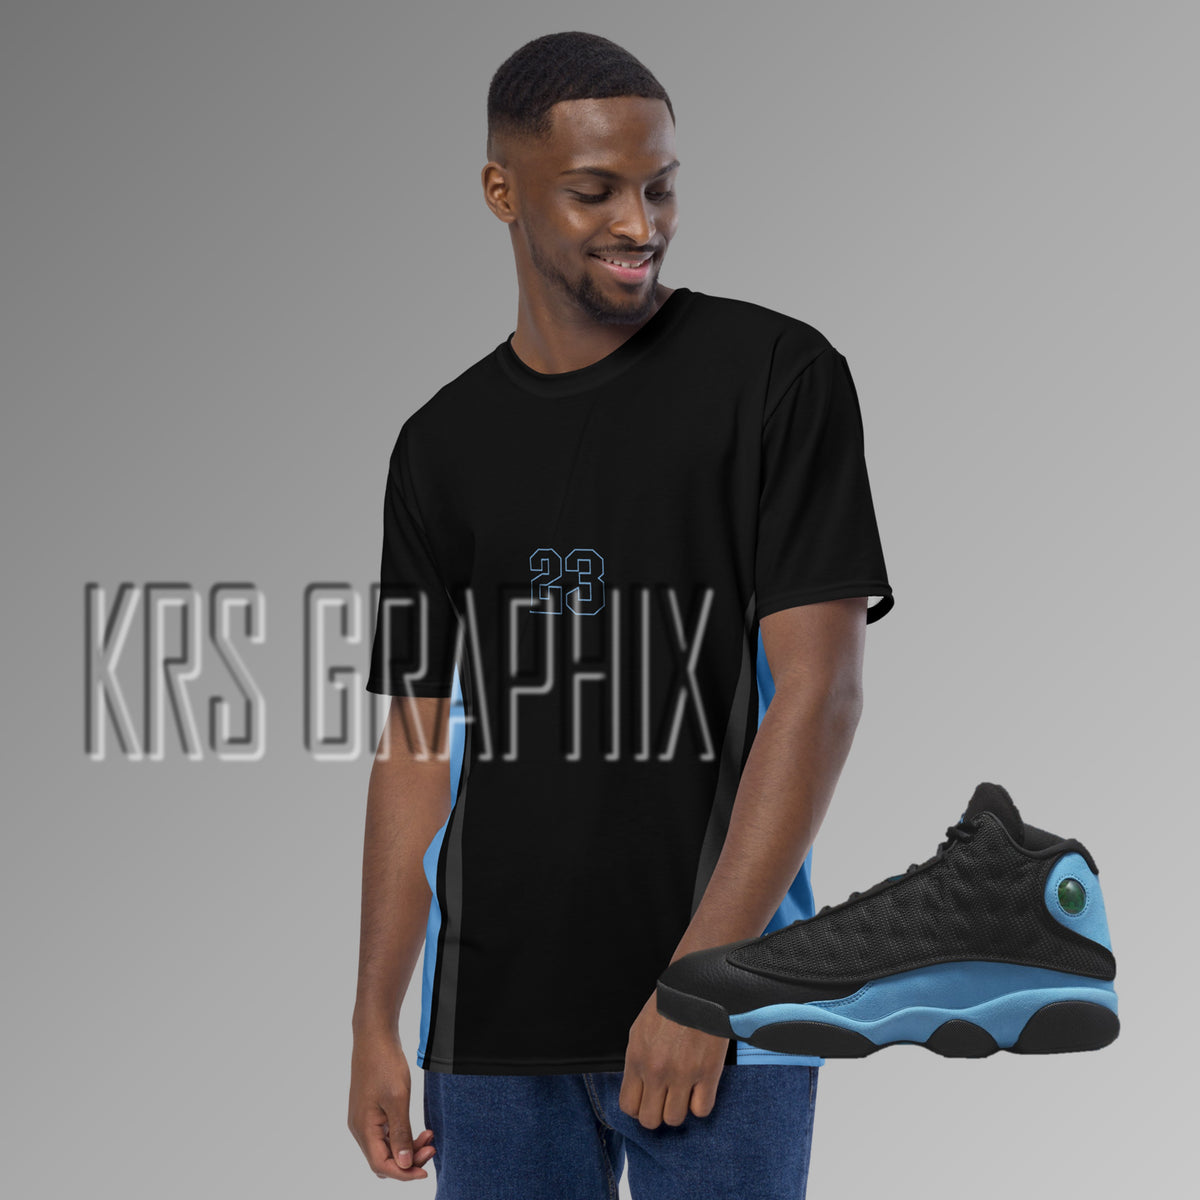 Jordan 13 kids sneaker lakers collection matches shirts designed